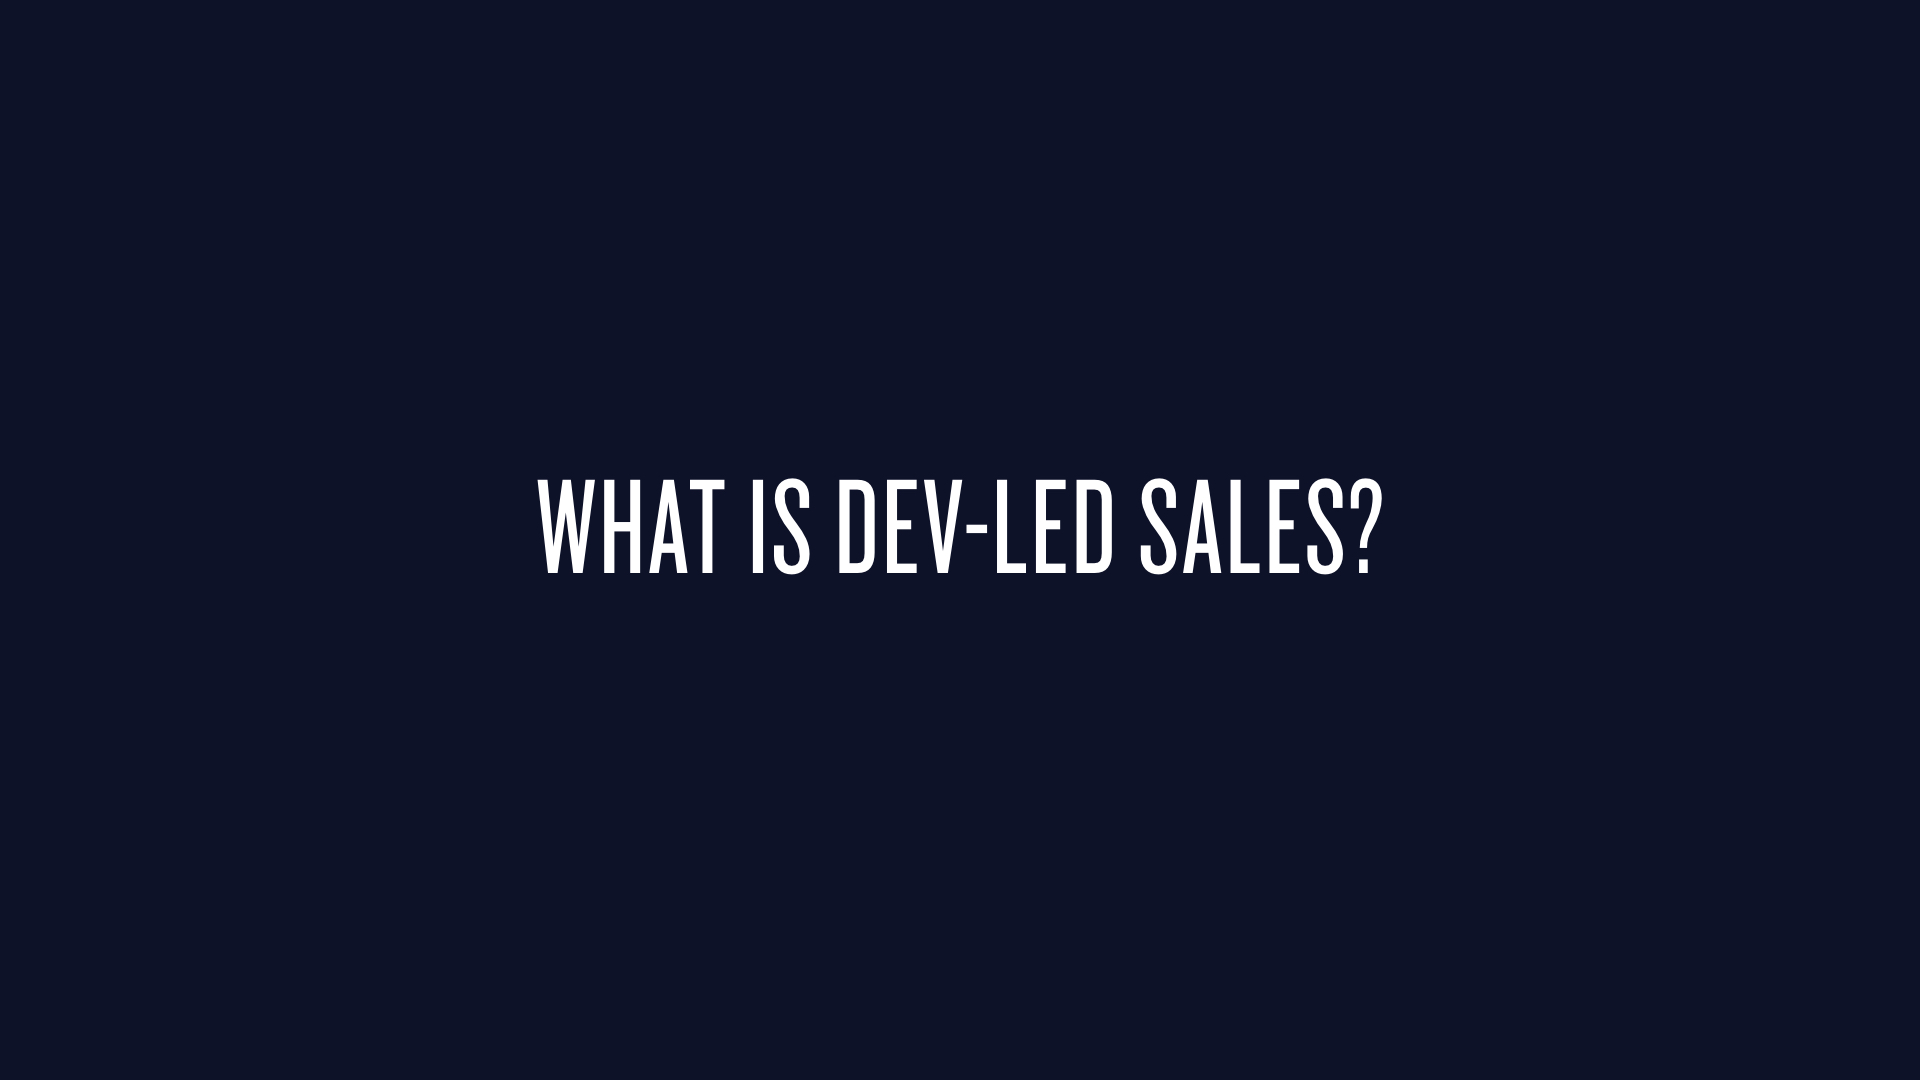 Subsection for what is dev-led sales.